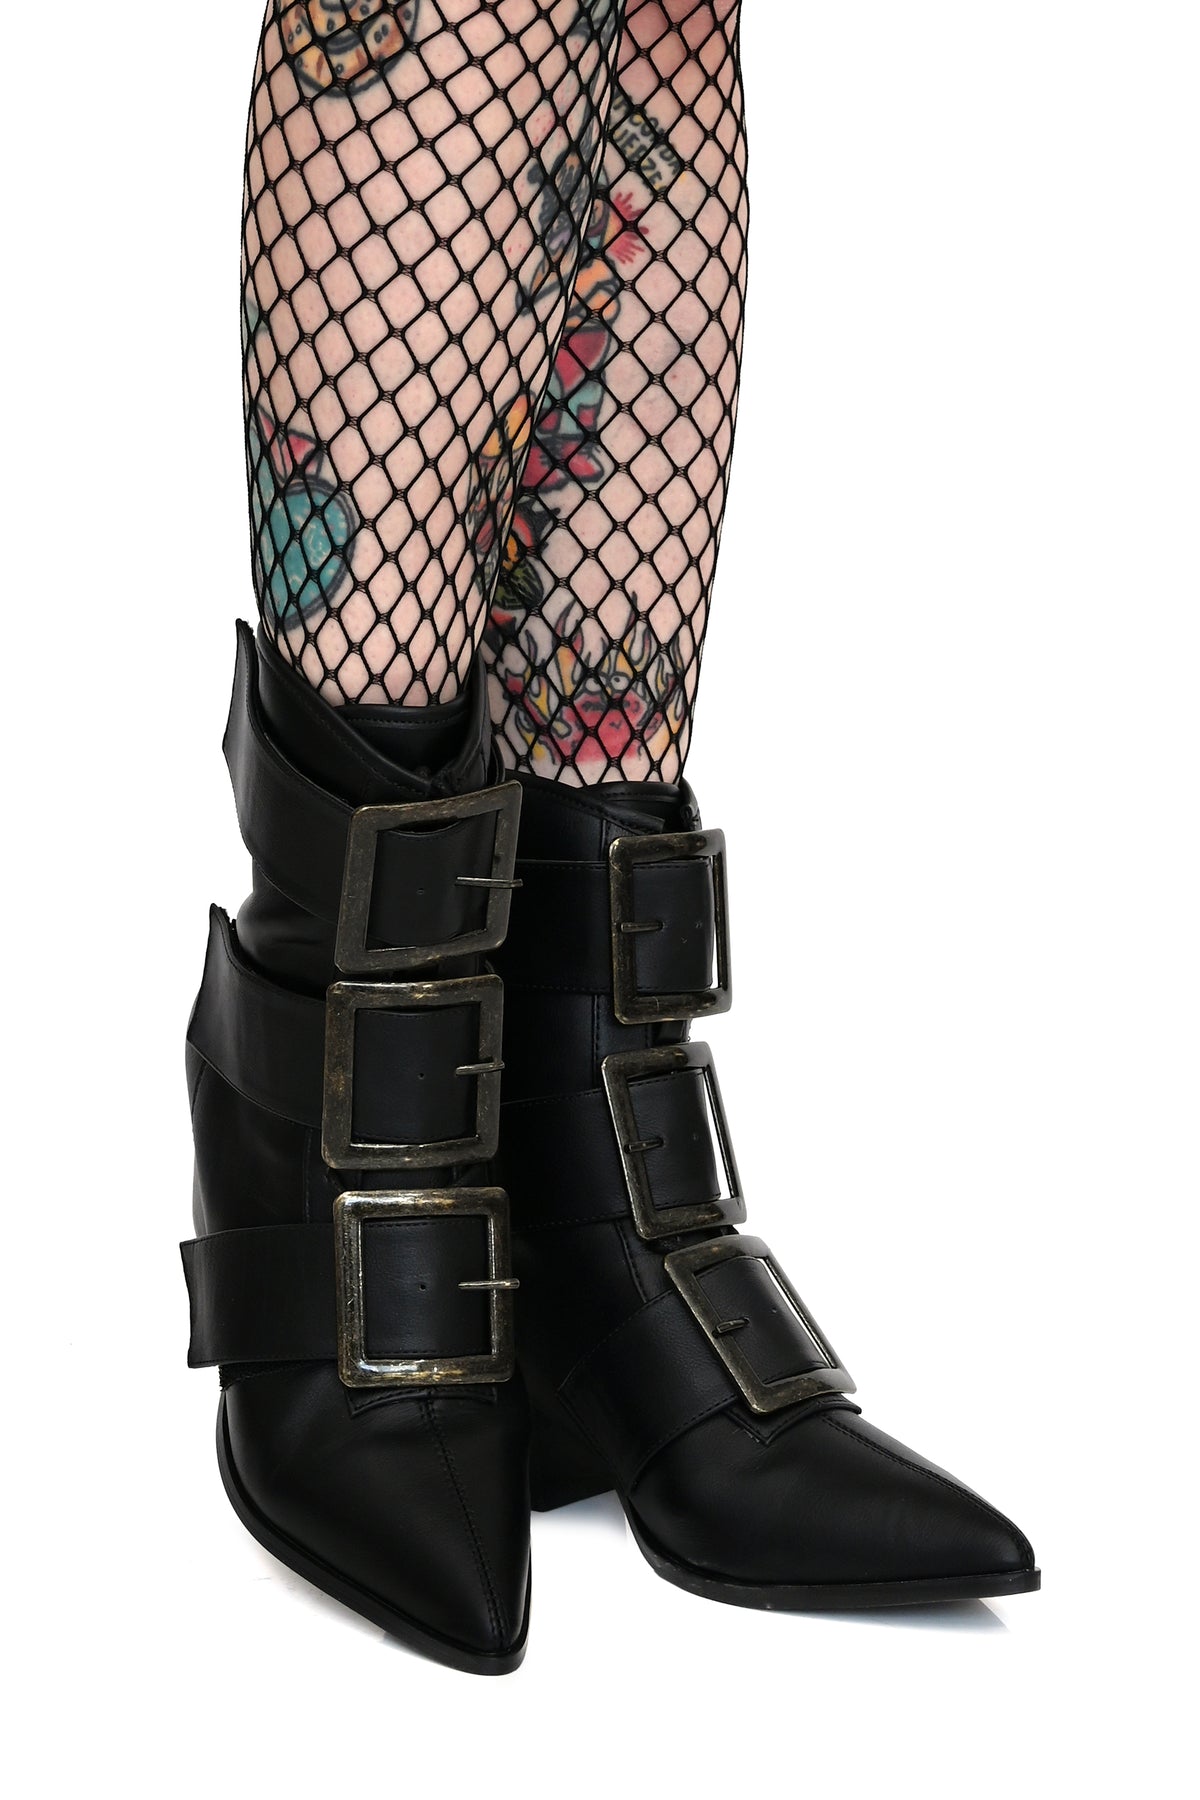 black pointed toe boots with large brass buckles